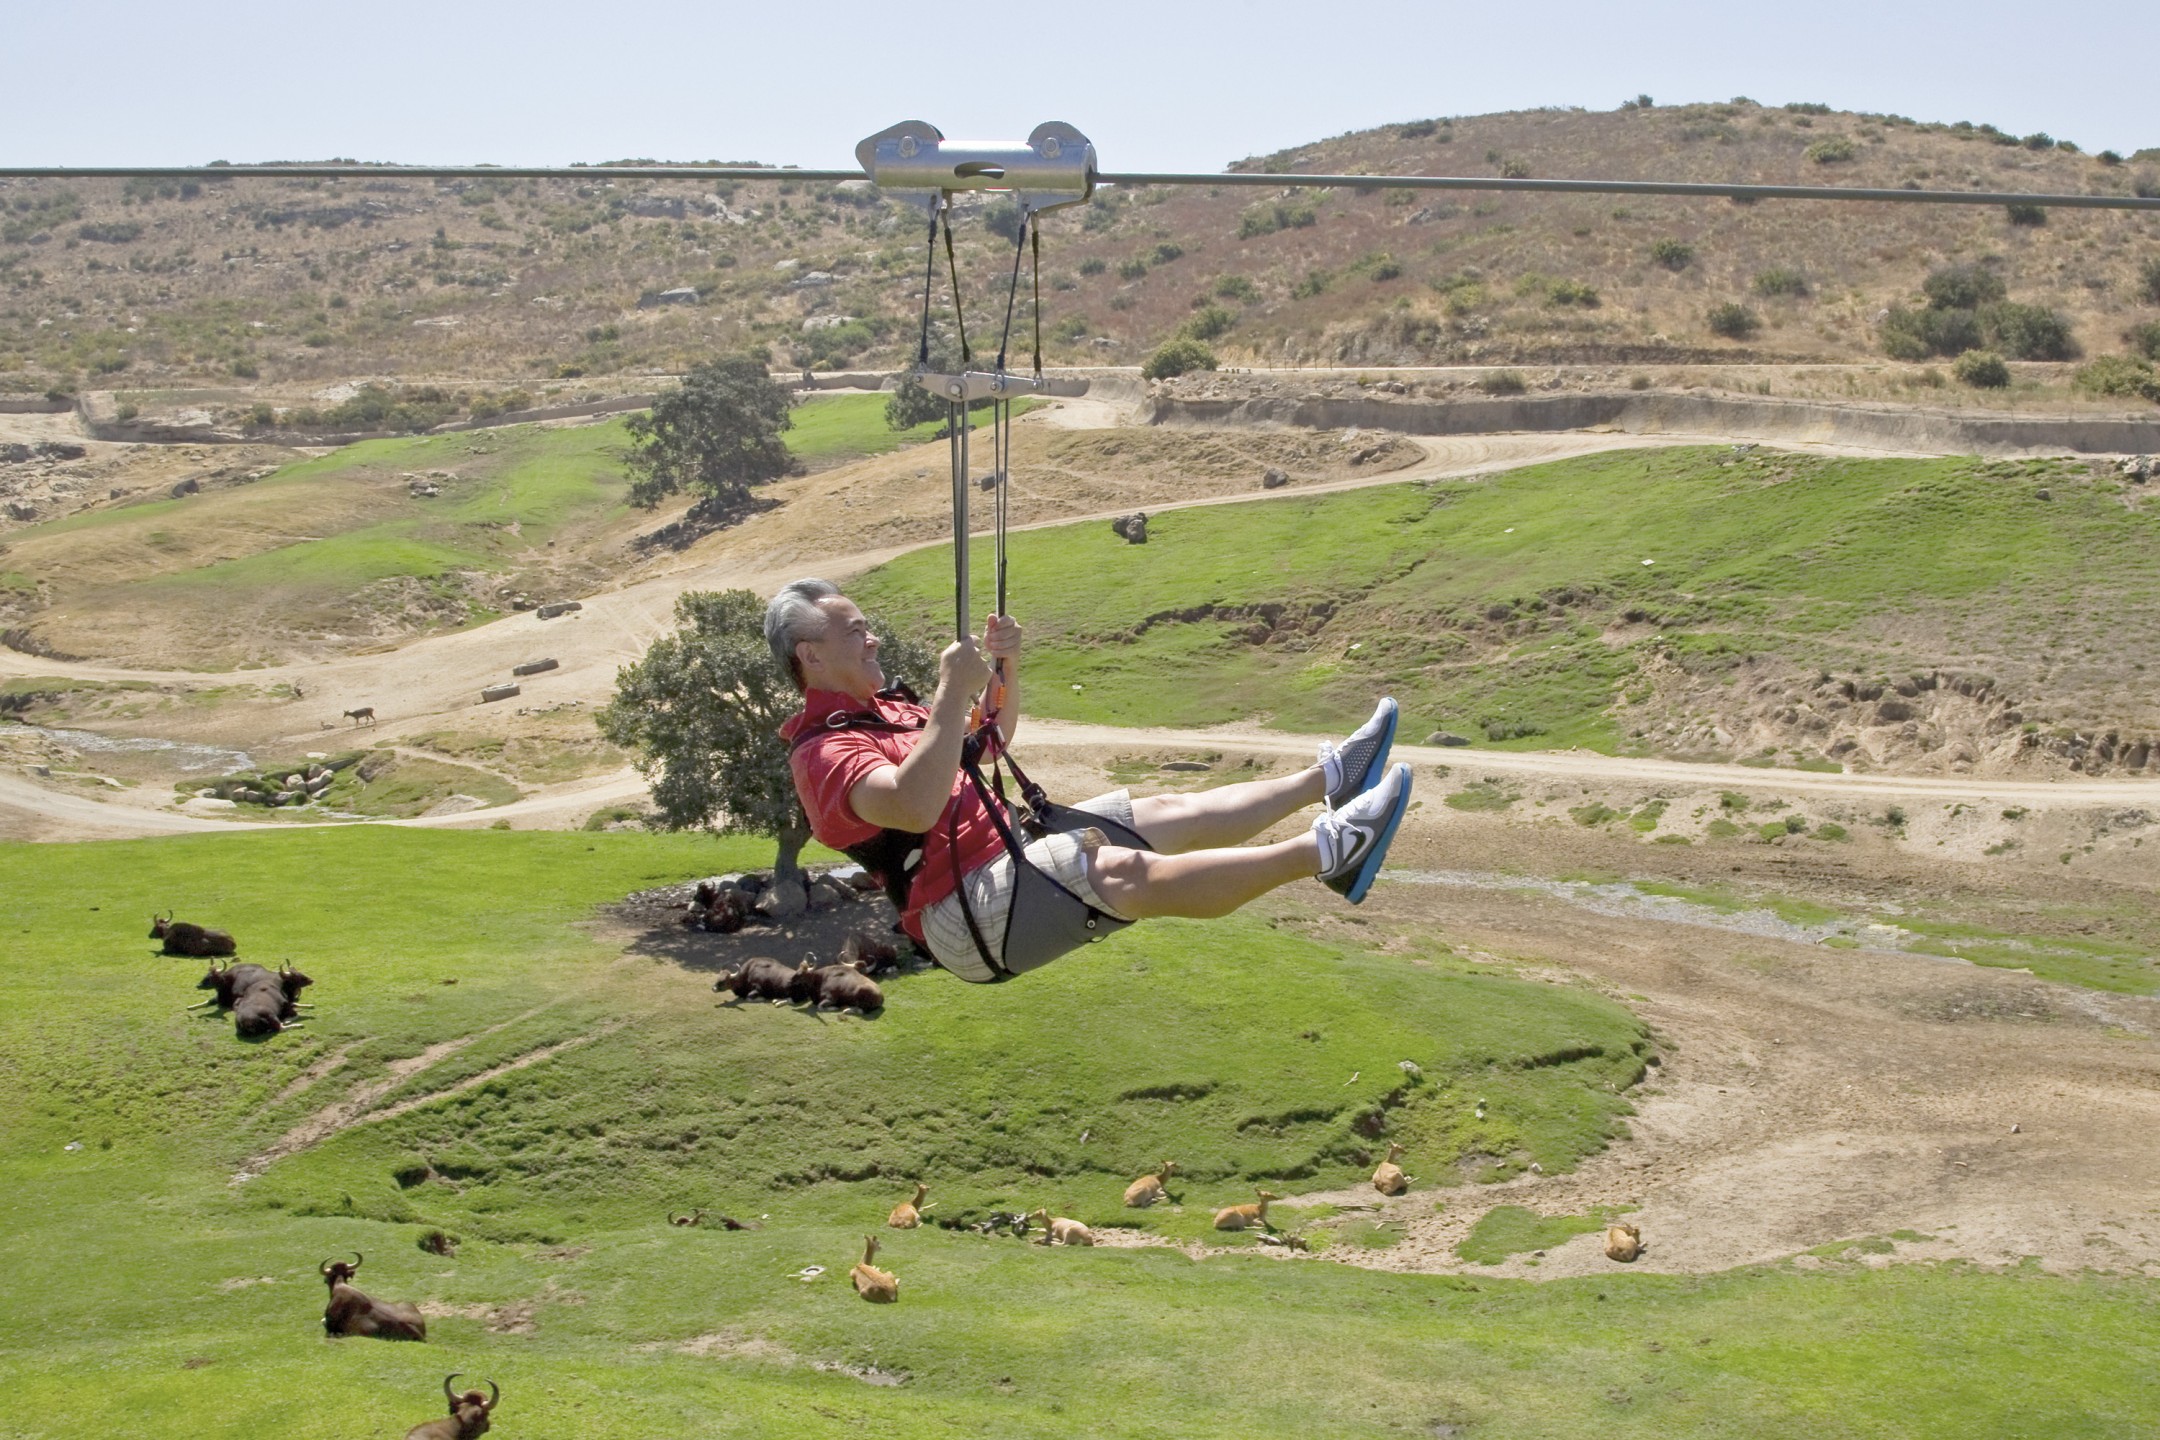 As a very different experience than the San Diego Zoo, the Wild Animal Park was the perfect place for adventure. With more safari tours than ever, Wild Animal Park guests could zip high above the Asian Plains exhibits on Flightline, ride in the back of a truck inside the field enclosures on a Photo Caravan, enjoy a small-group tour on a Savanna Safari, or even camp overnight at a Roar & Snore.